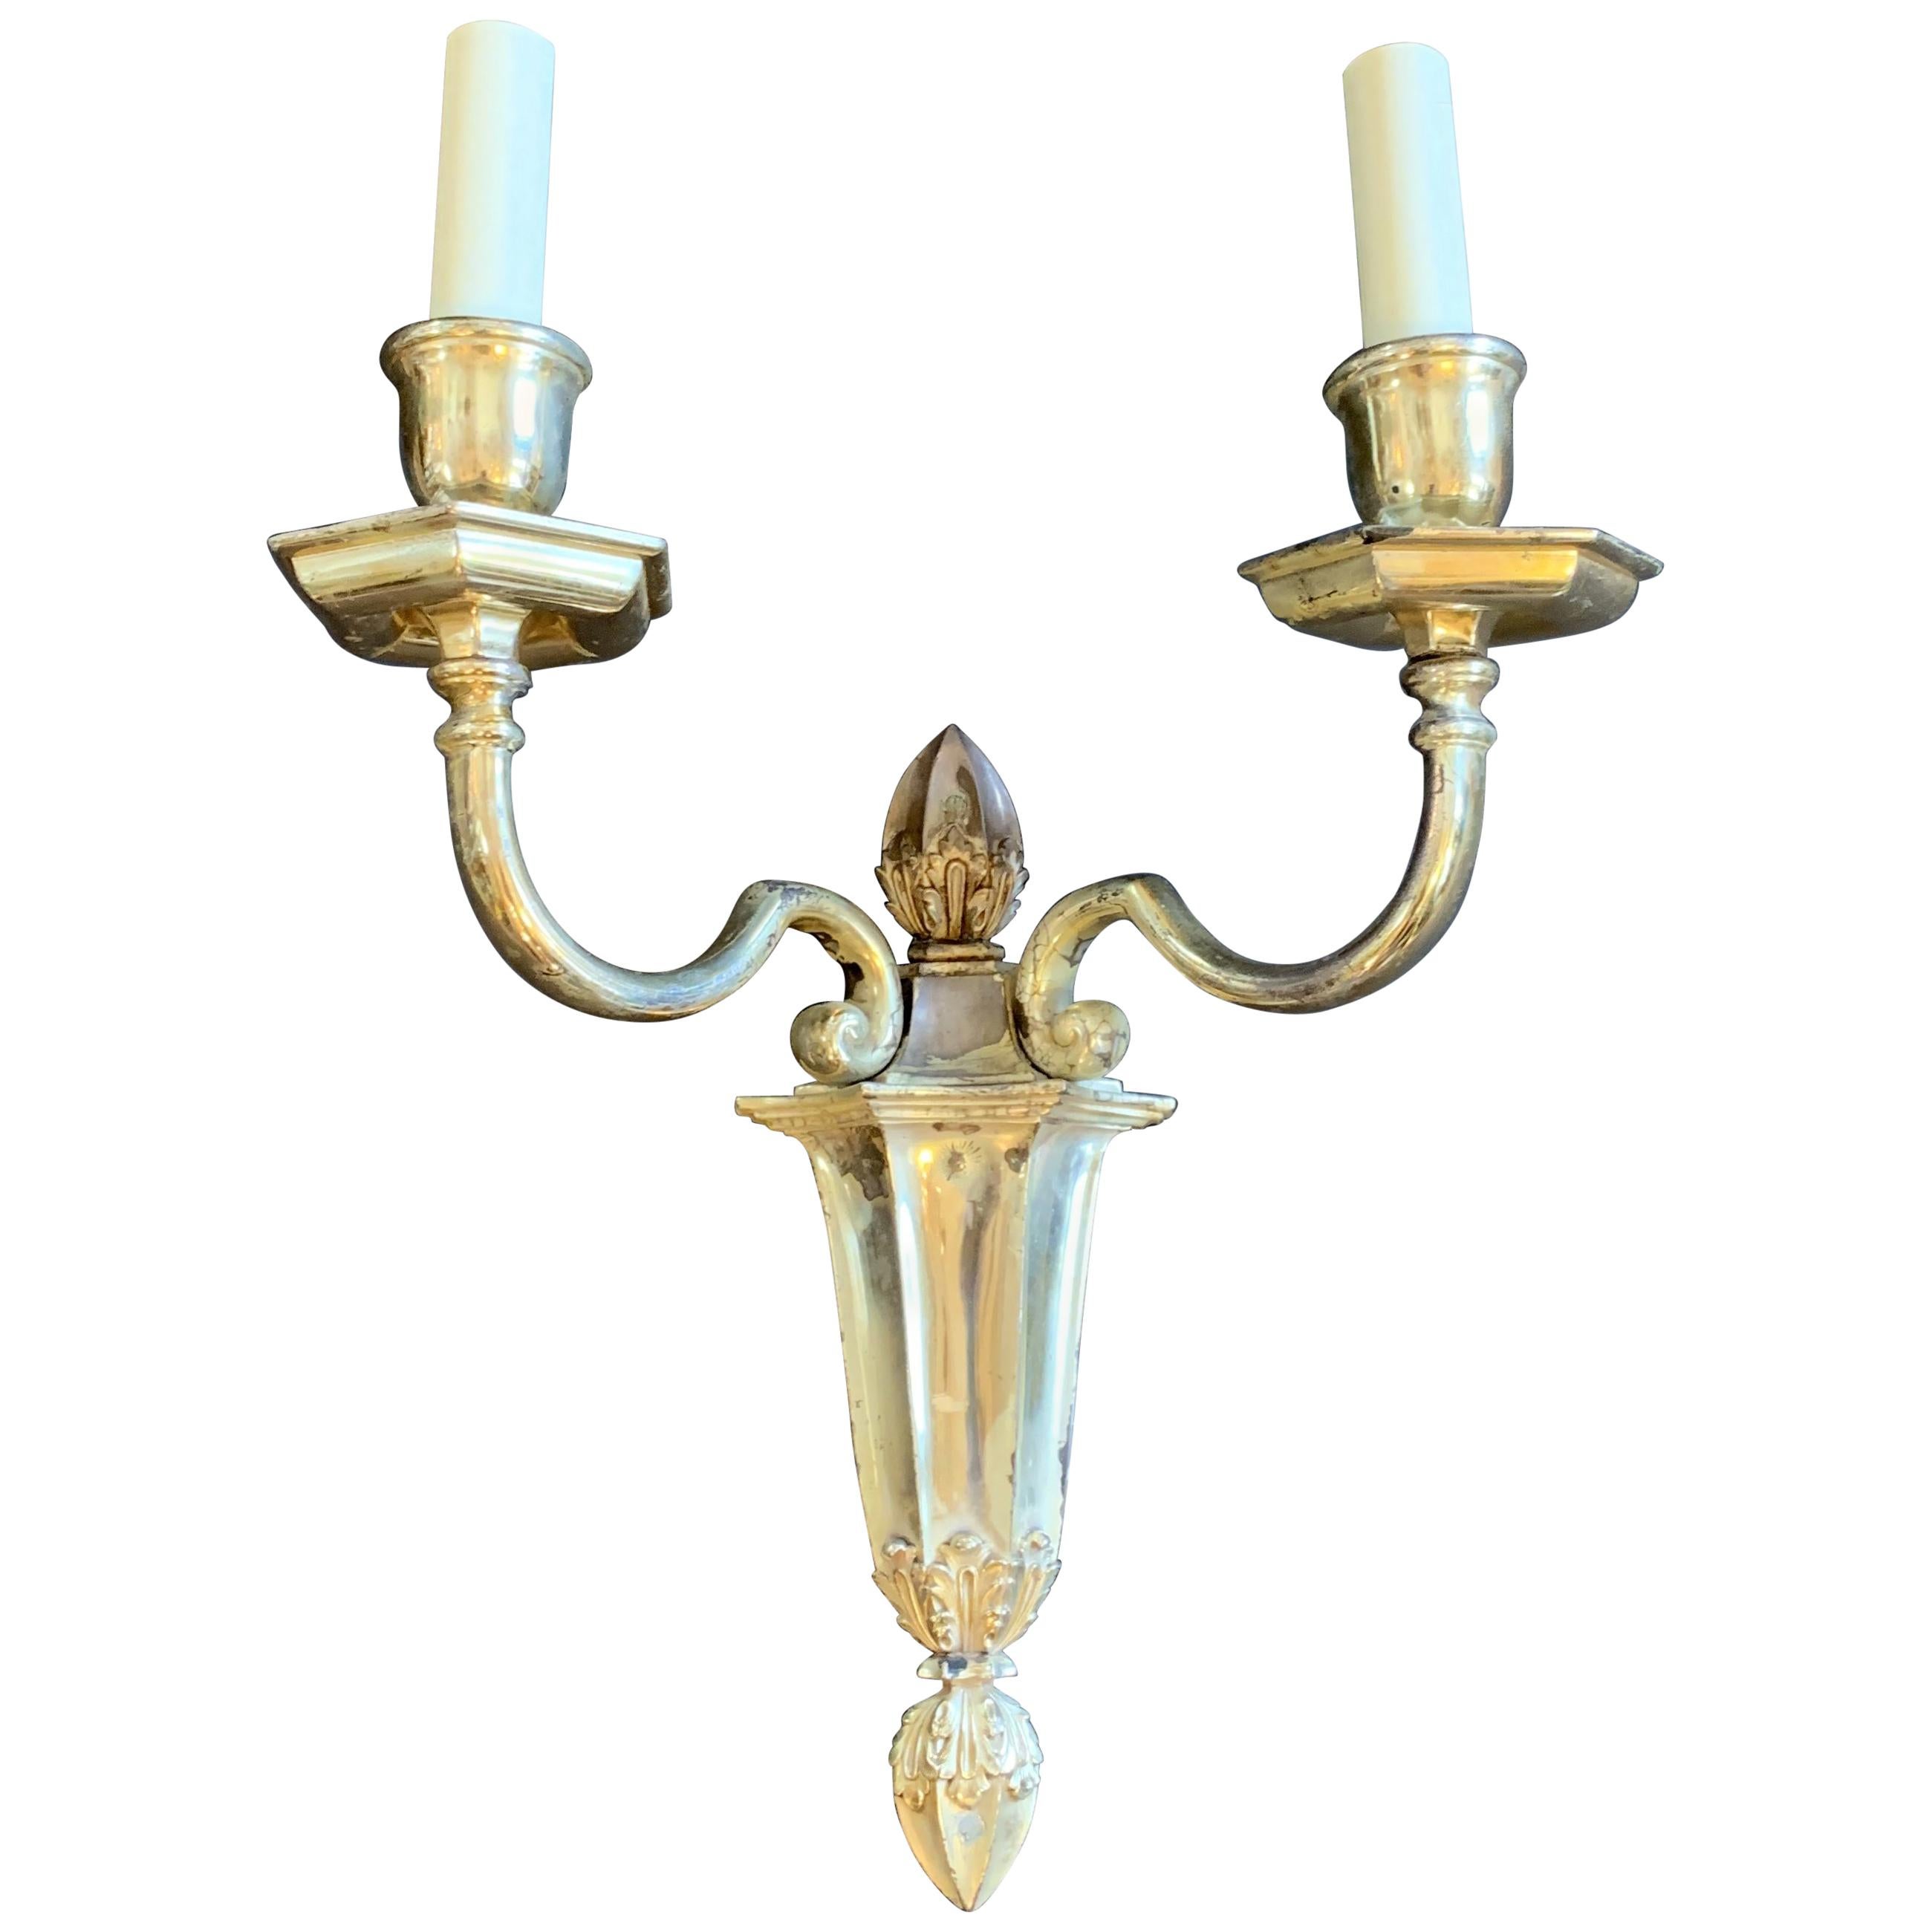 Wonderful Set of Four Caldwell Silvered Bronze Neoclassical 2-Light Sconces